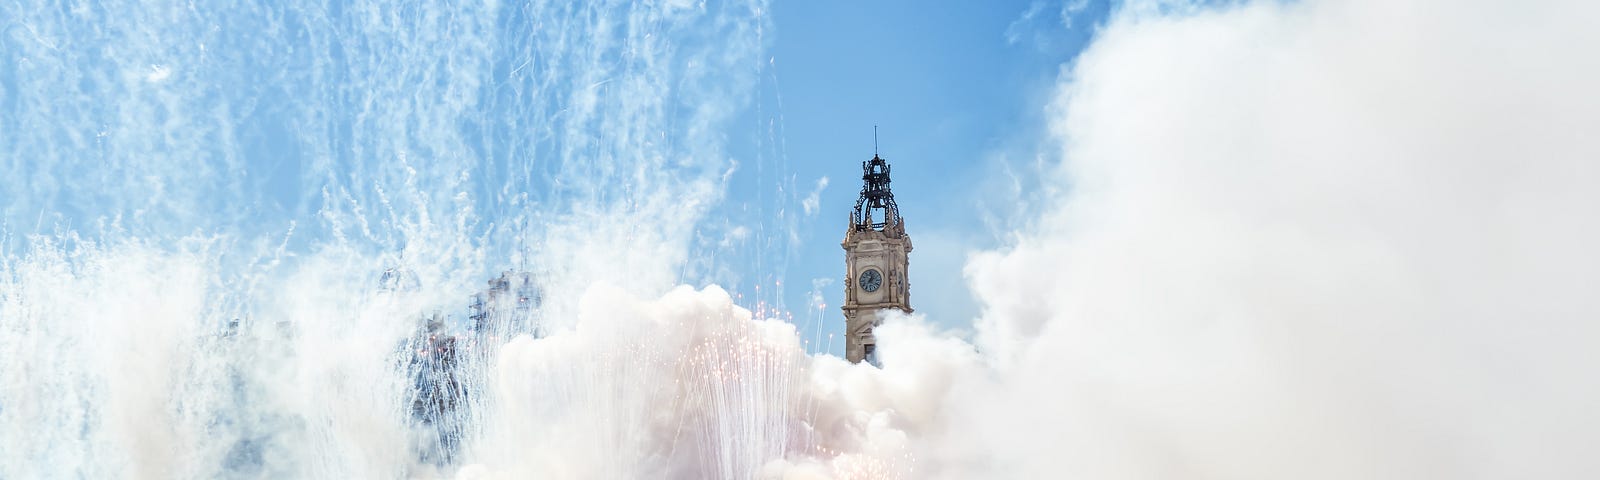 The smoke of fireworks obscures a tower in Valencia